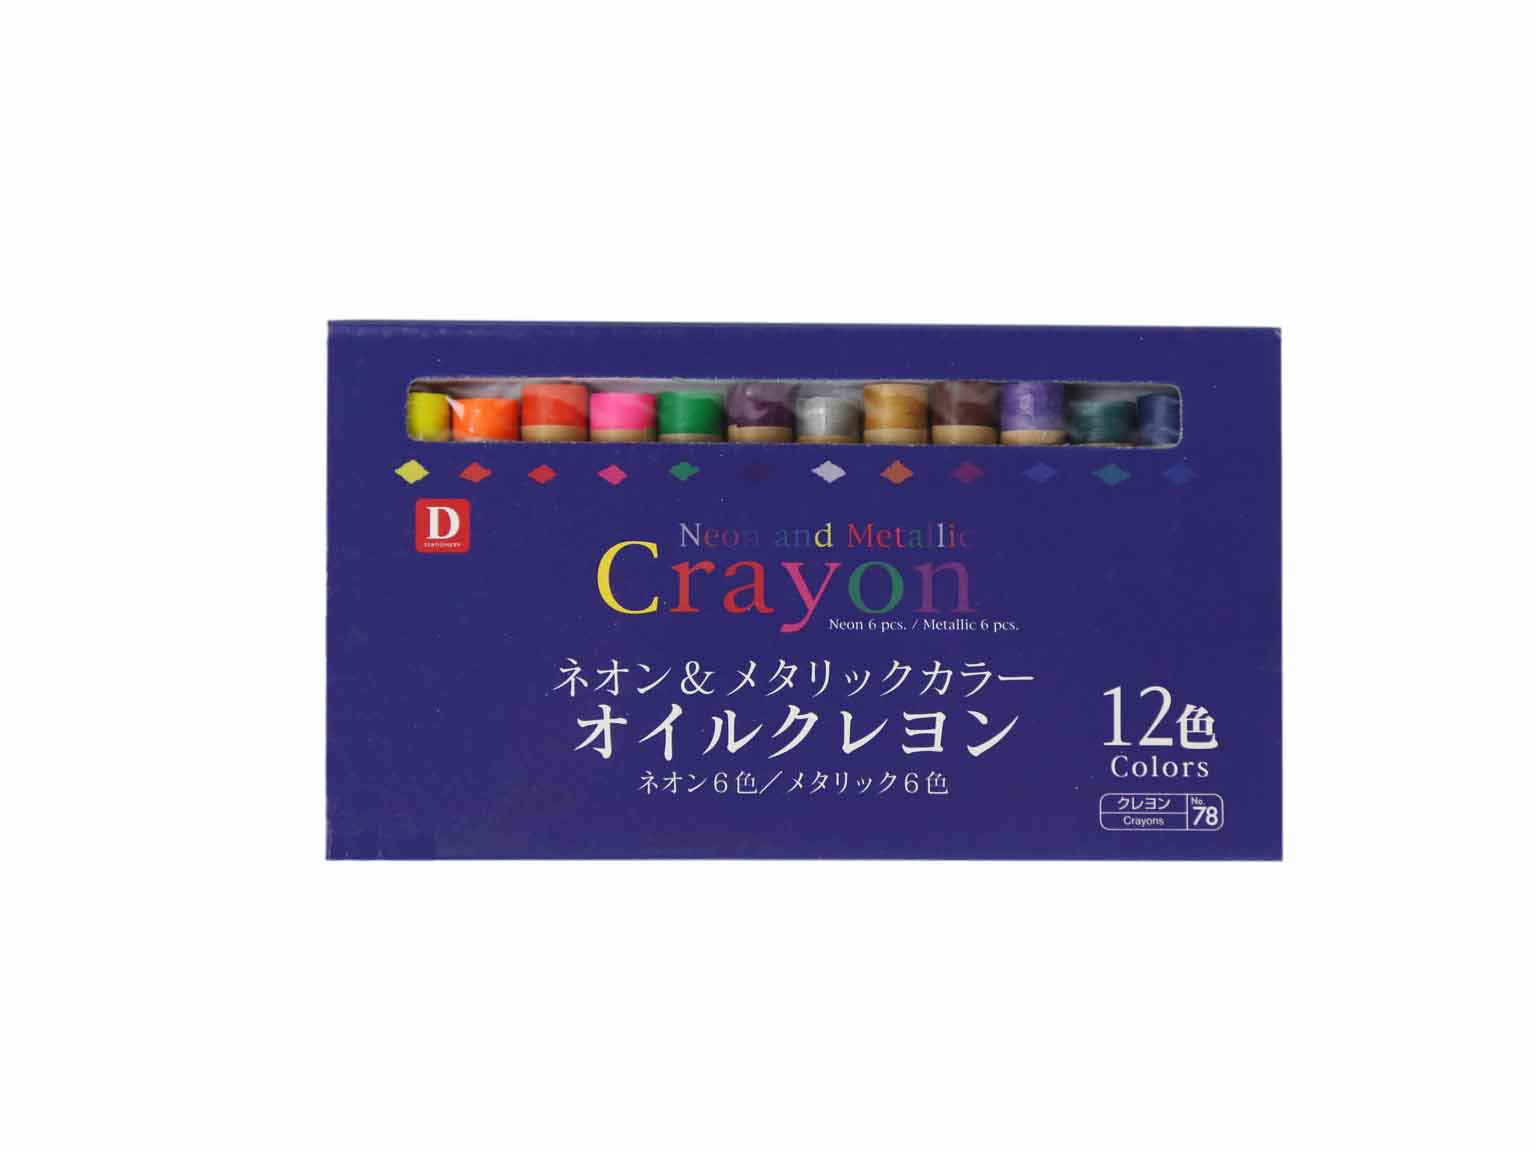 Neon & Metallic Crayons - Set of 12 Colors - Daiso Japan Middle East